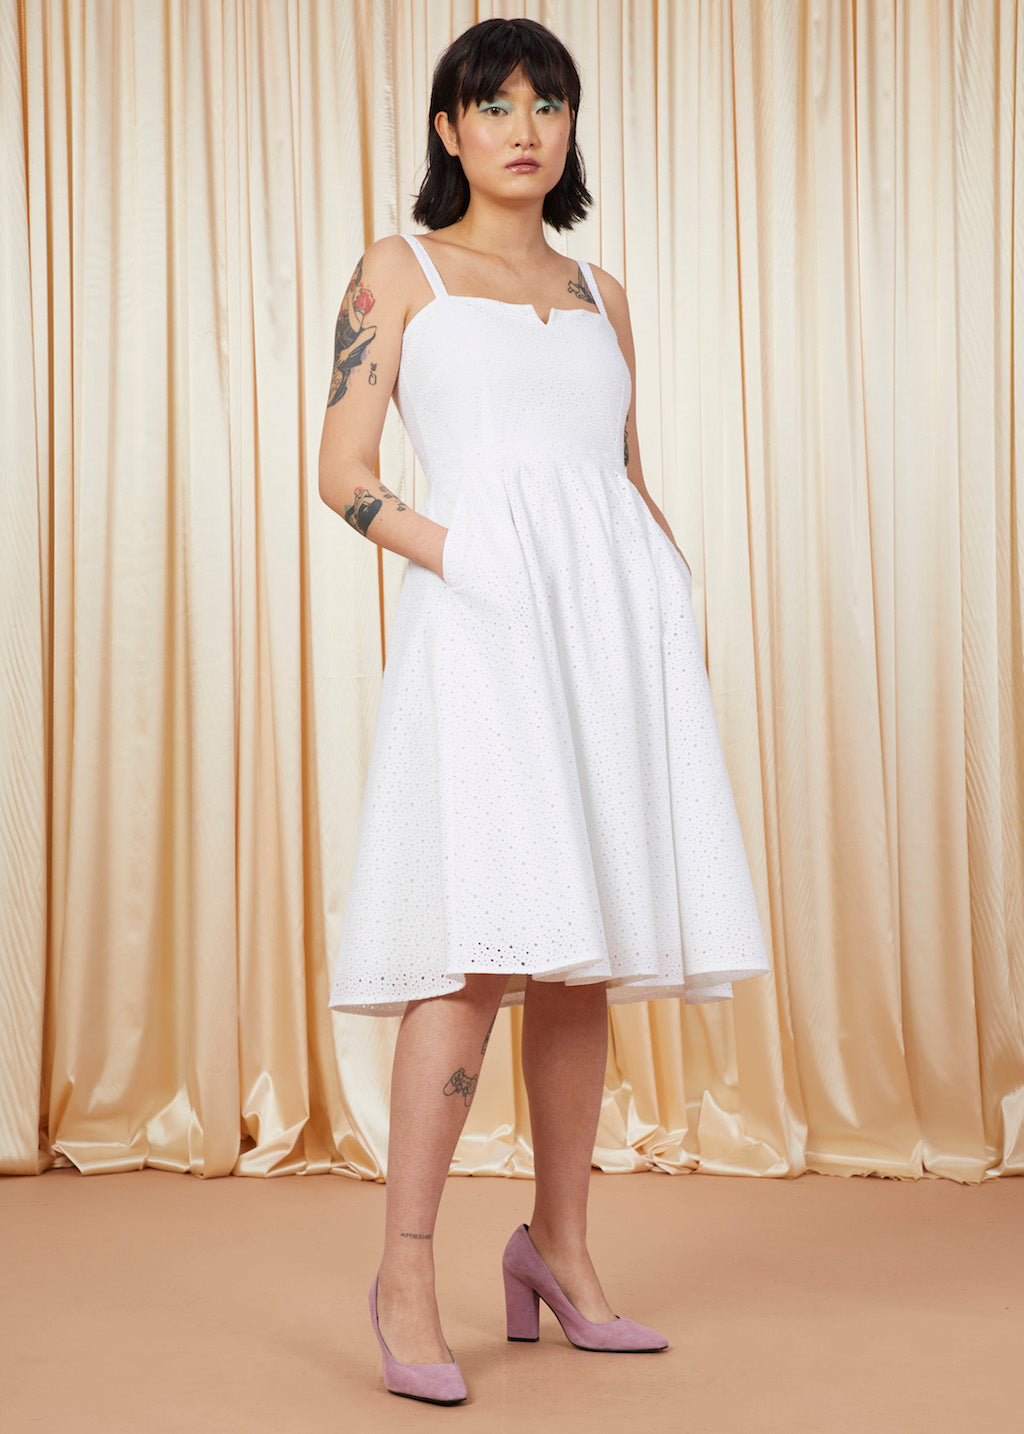 Lay Lady Lay | Embroidered Cotton Wedding Dress